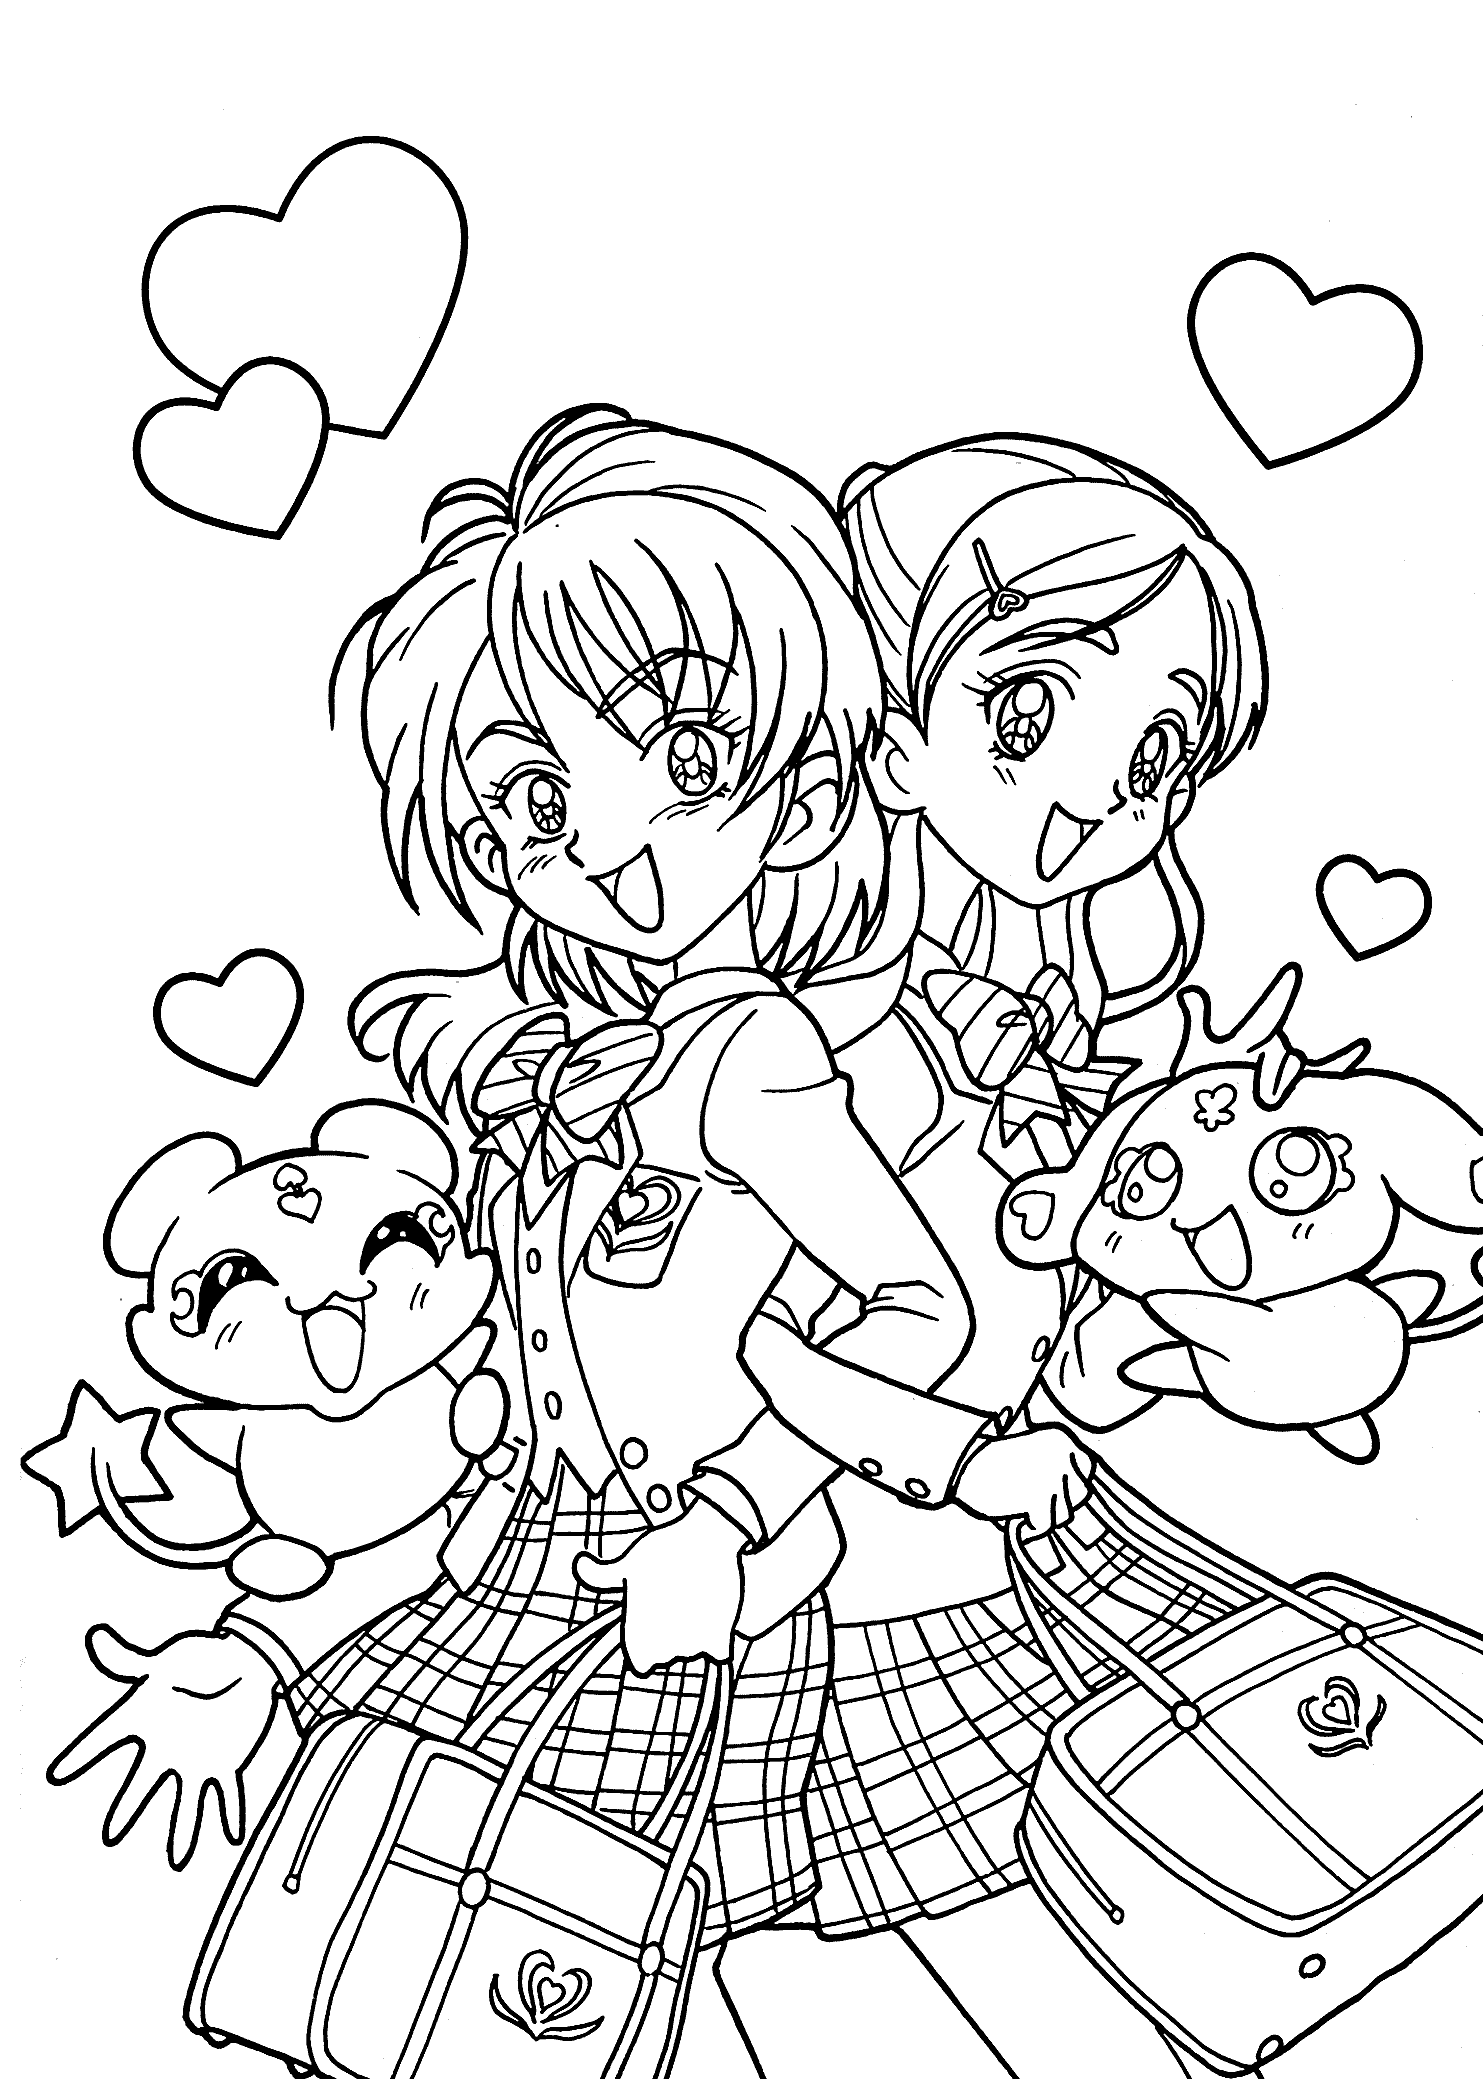 Anime Fairy coloring page | Free Printable Coloring Pages